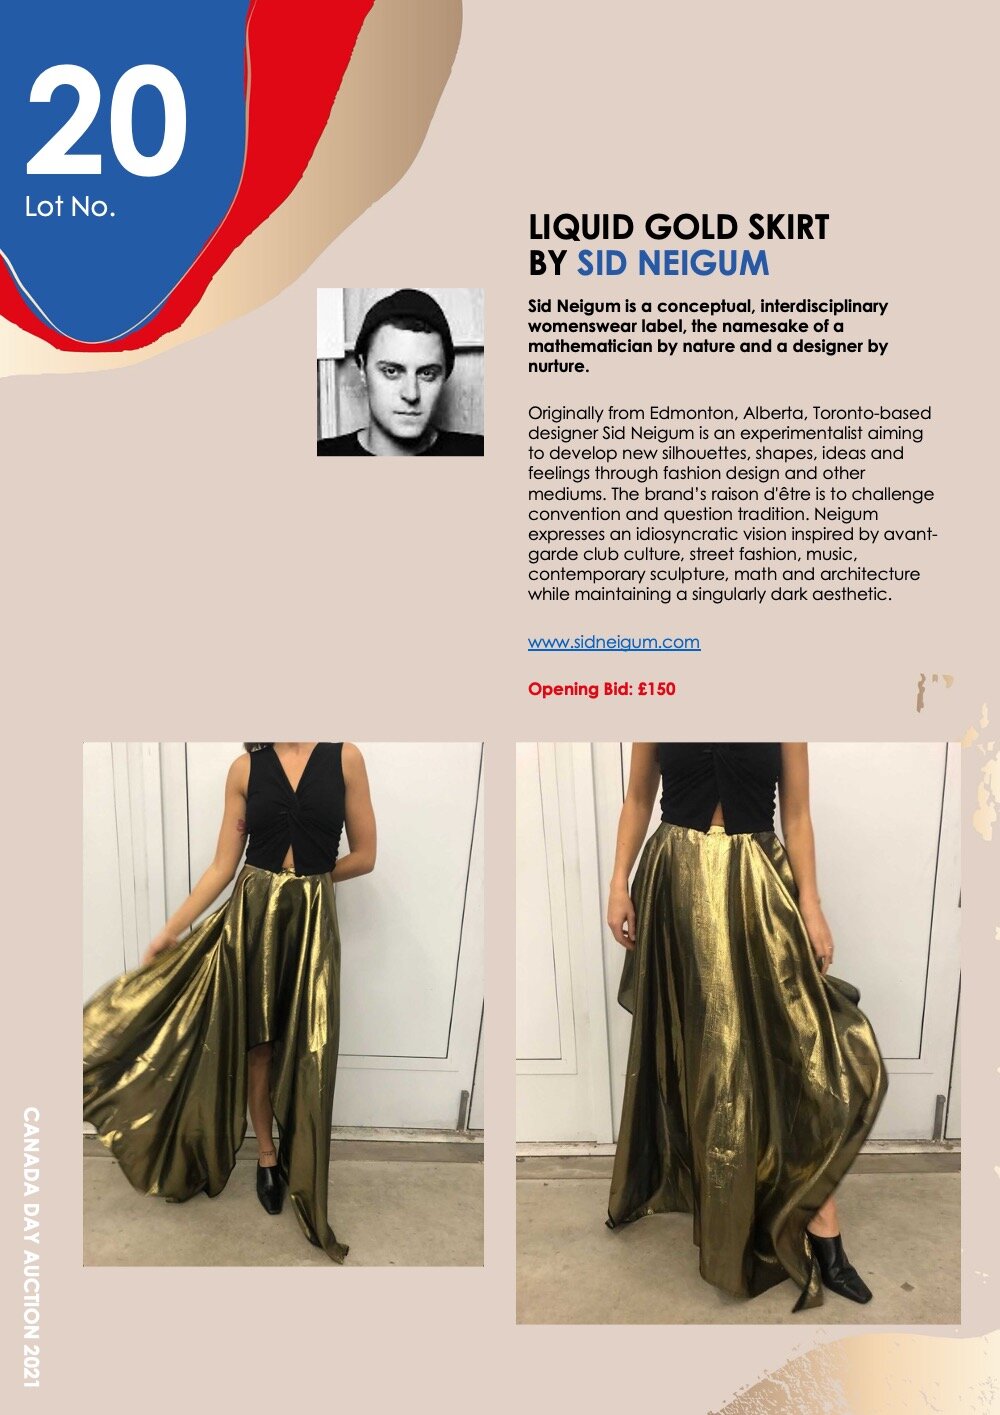   LIQUID GOLD SKIRT BY SID NEIGUM     Sid Neigum is a conceptual, interdisciplinary womenswear label, the namesake of a mathematician by nature and a designer by nurture.    Originally from Edmonton, Alberta, Toronto-based designer Sid Neigum is an e